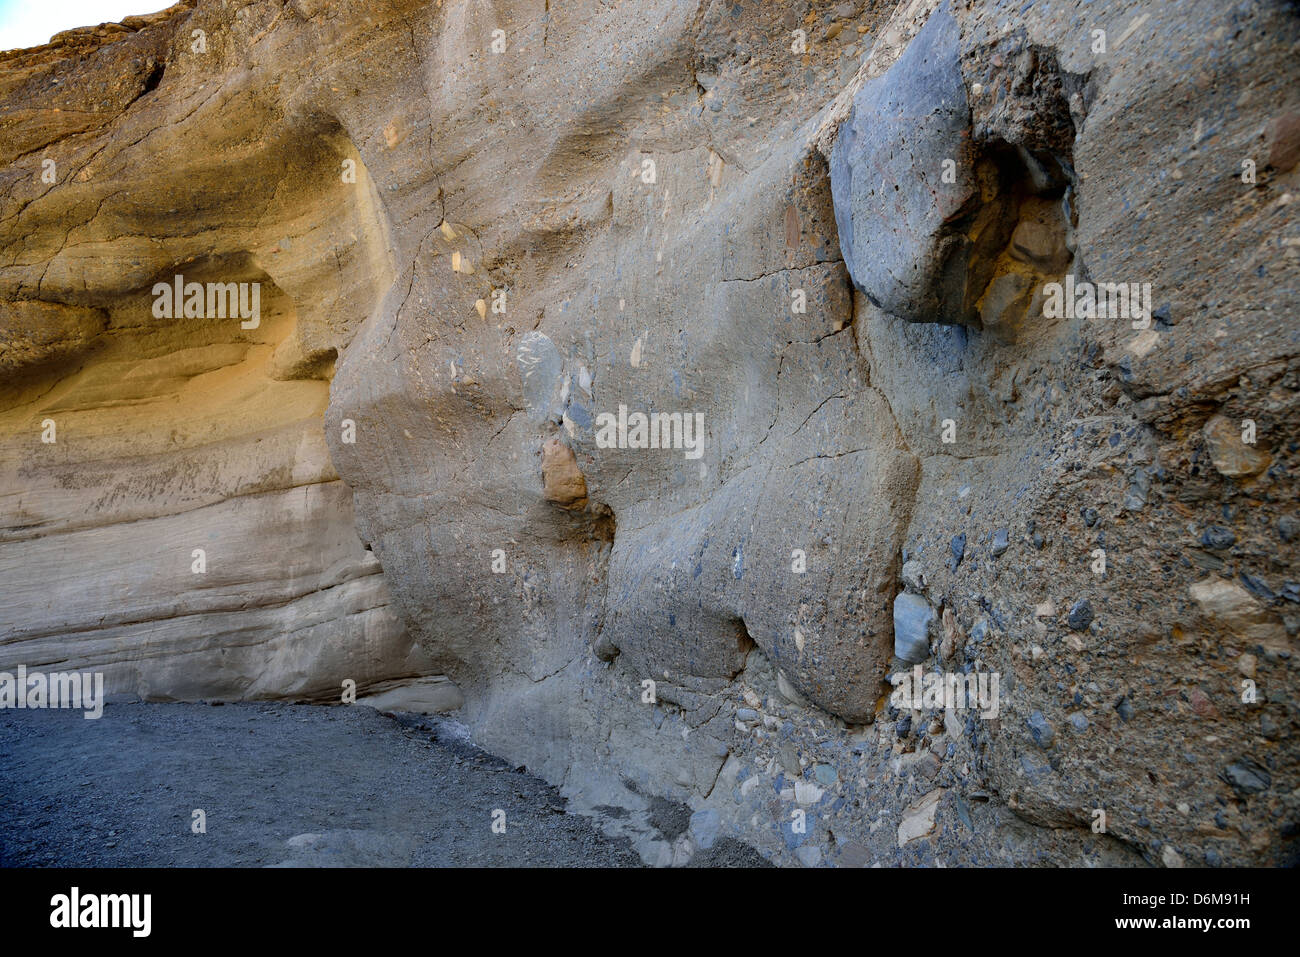 Mosaic Canyon's wall formed by conglomerates and breccia. Death Valley National Park, California, USA. Stock Photo